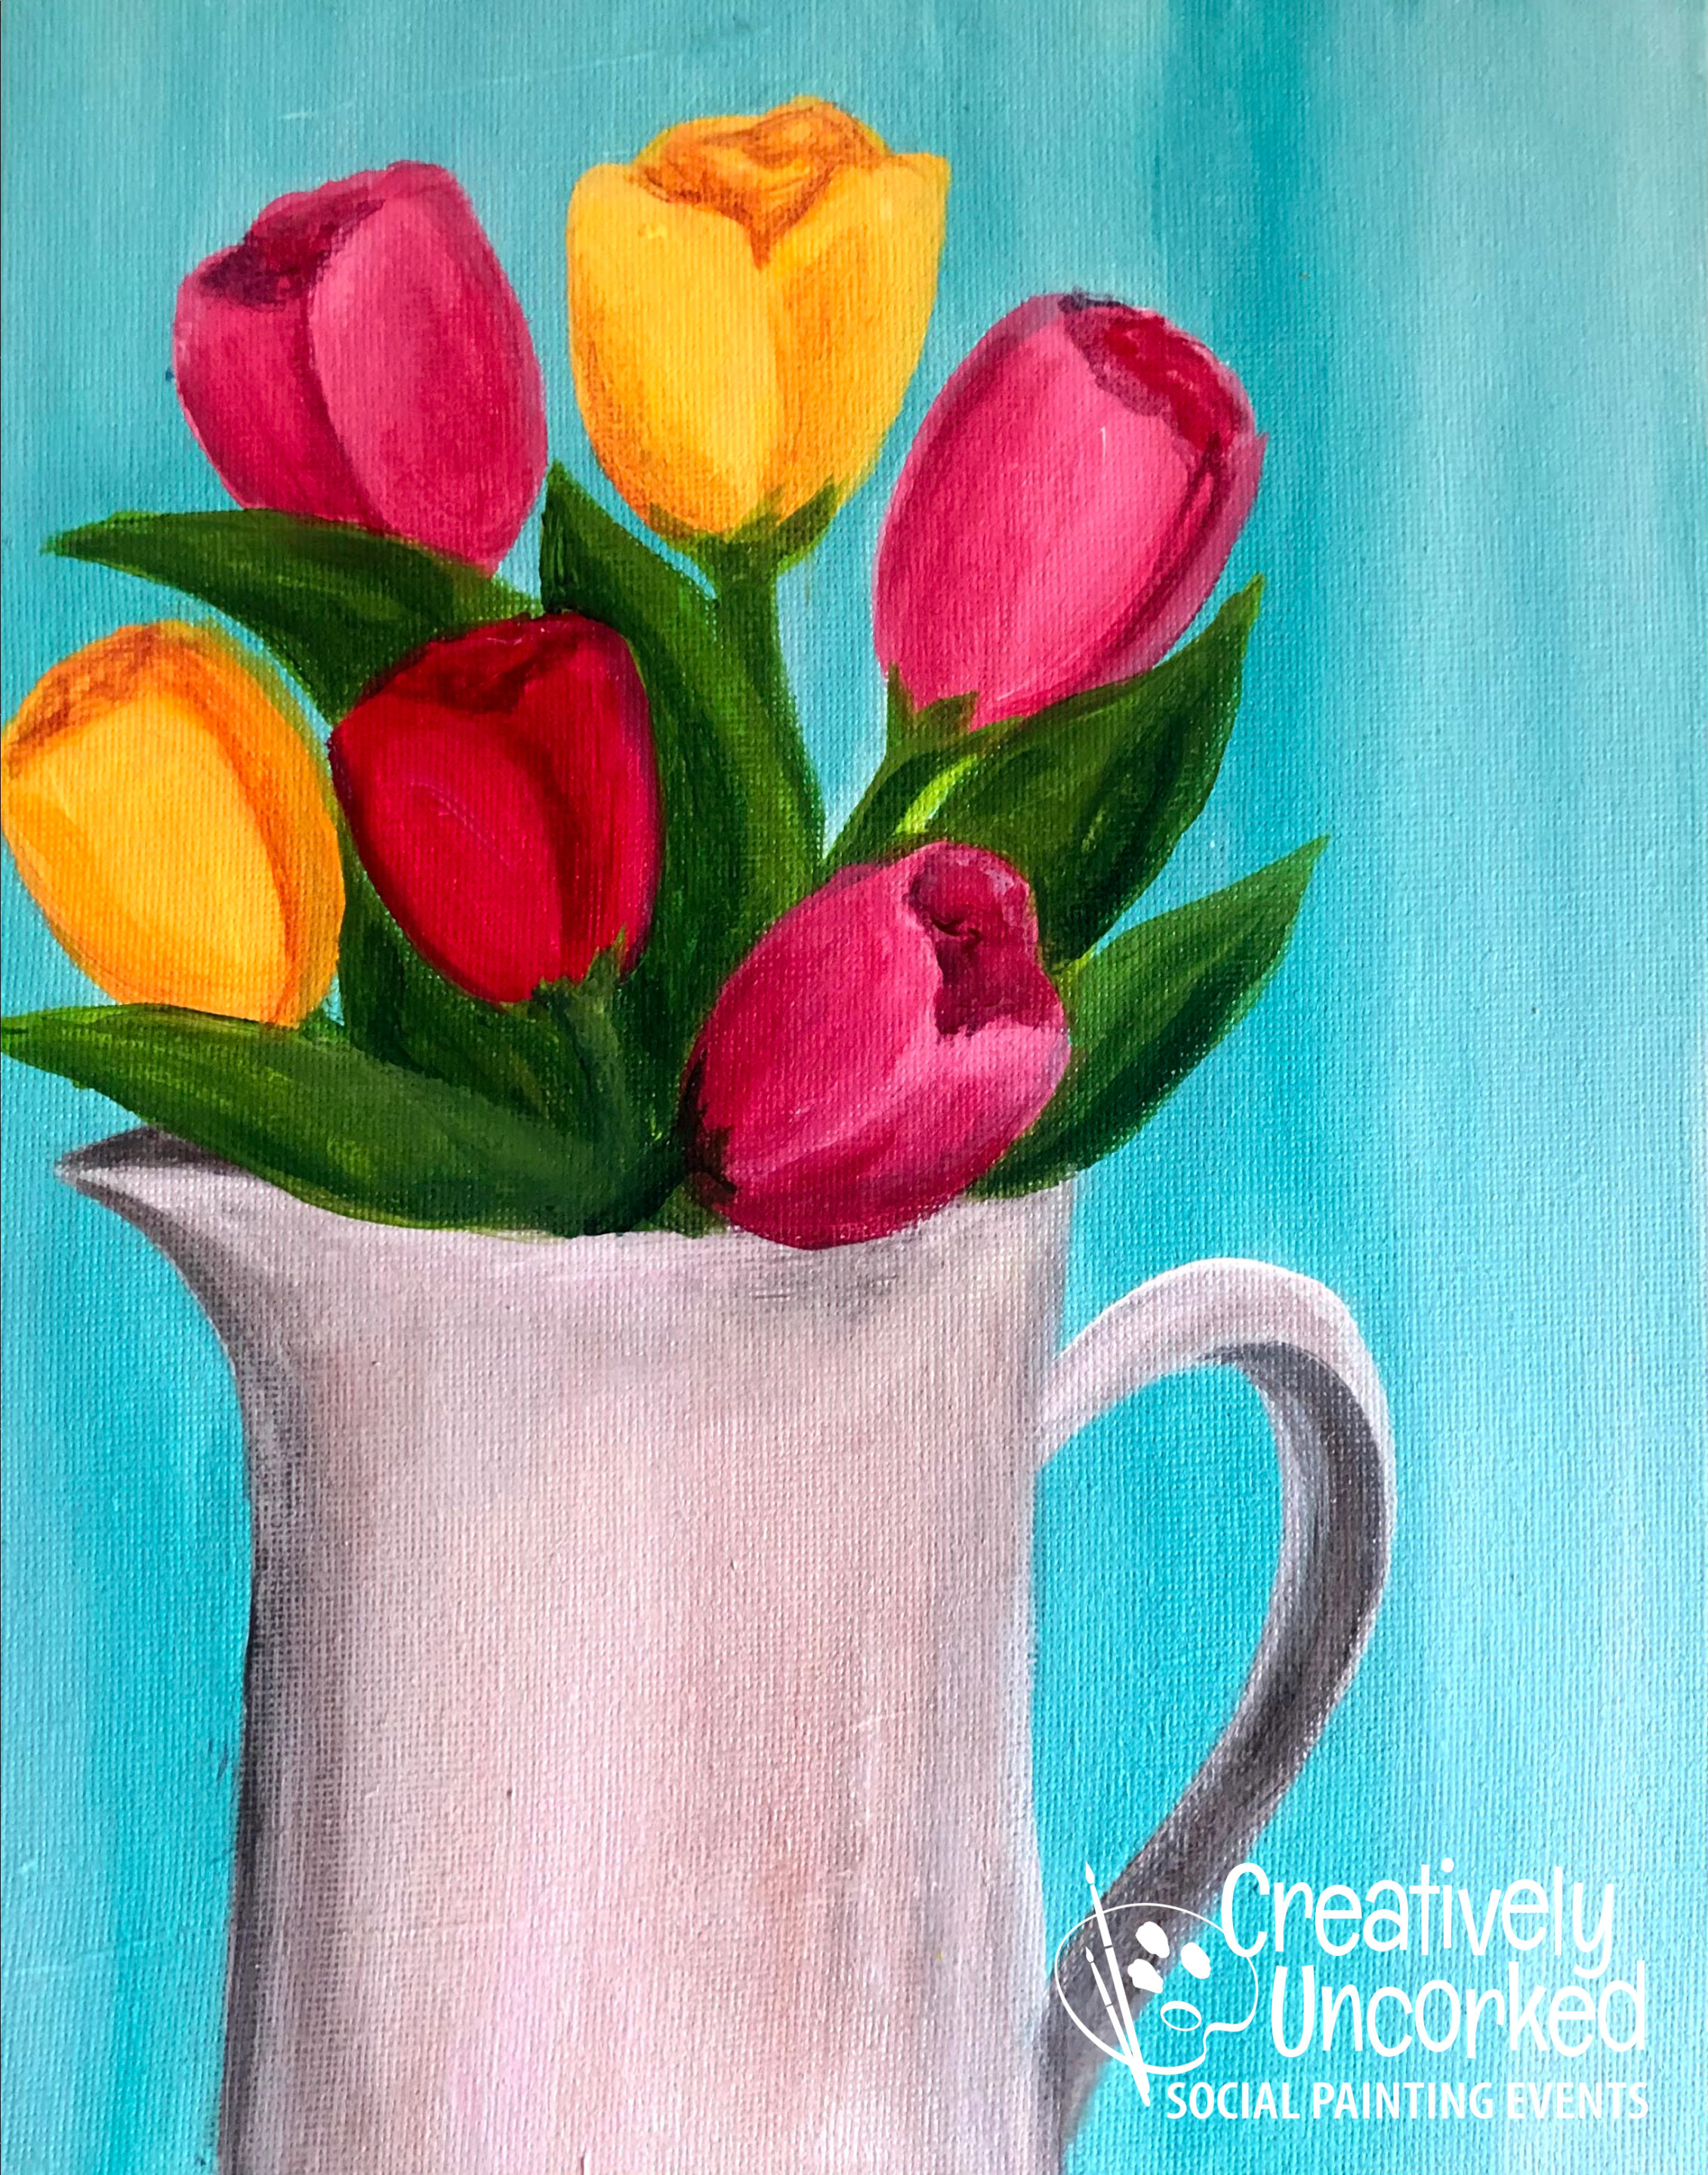 Pitcher of Flowers by Creatively Uncorked http://creativelyuncorked.com/